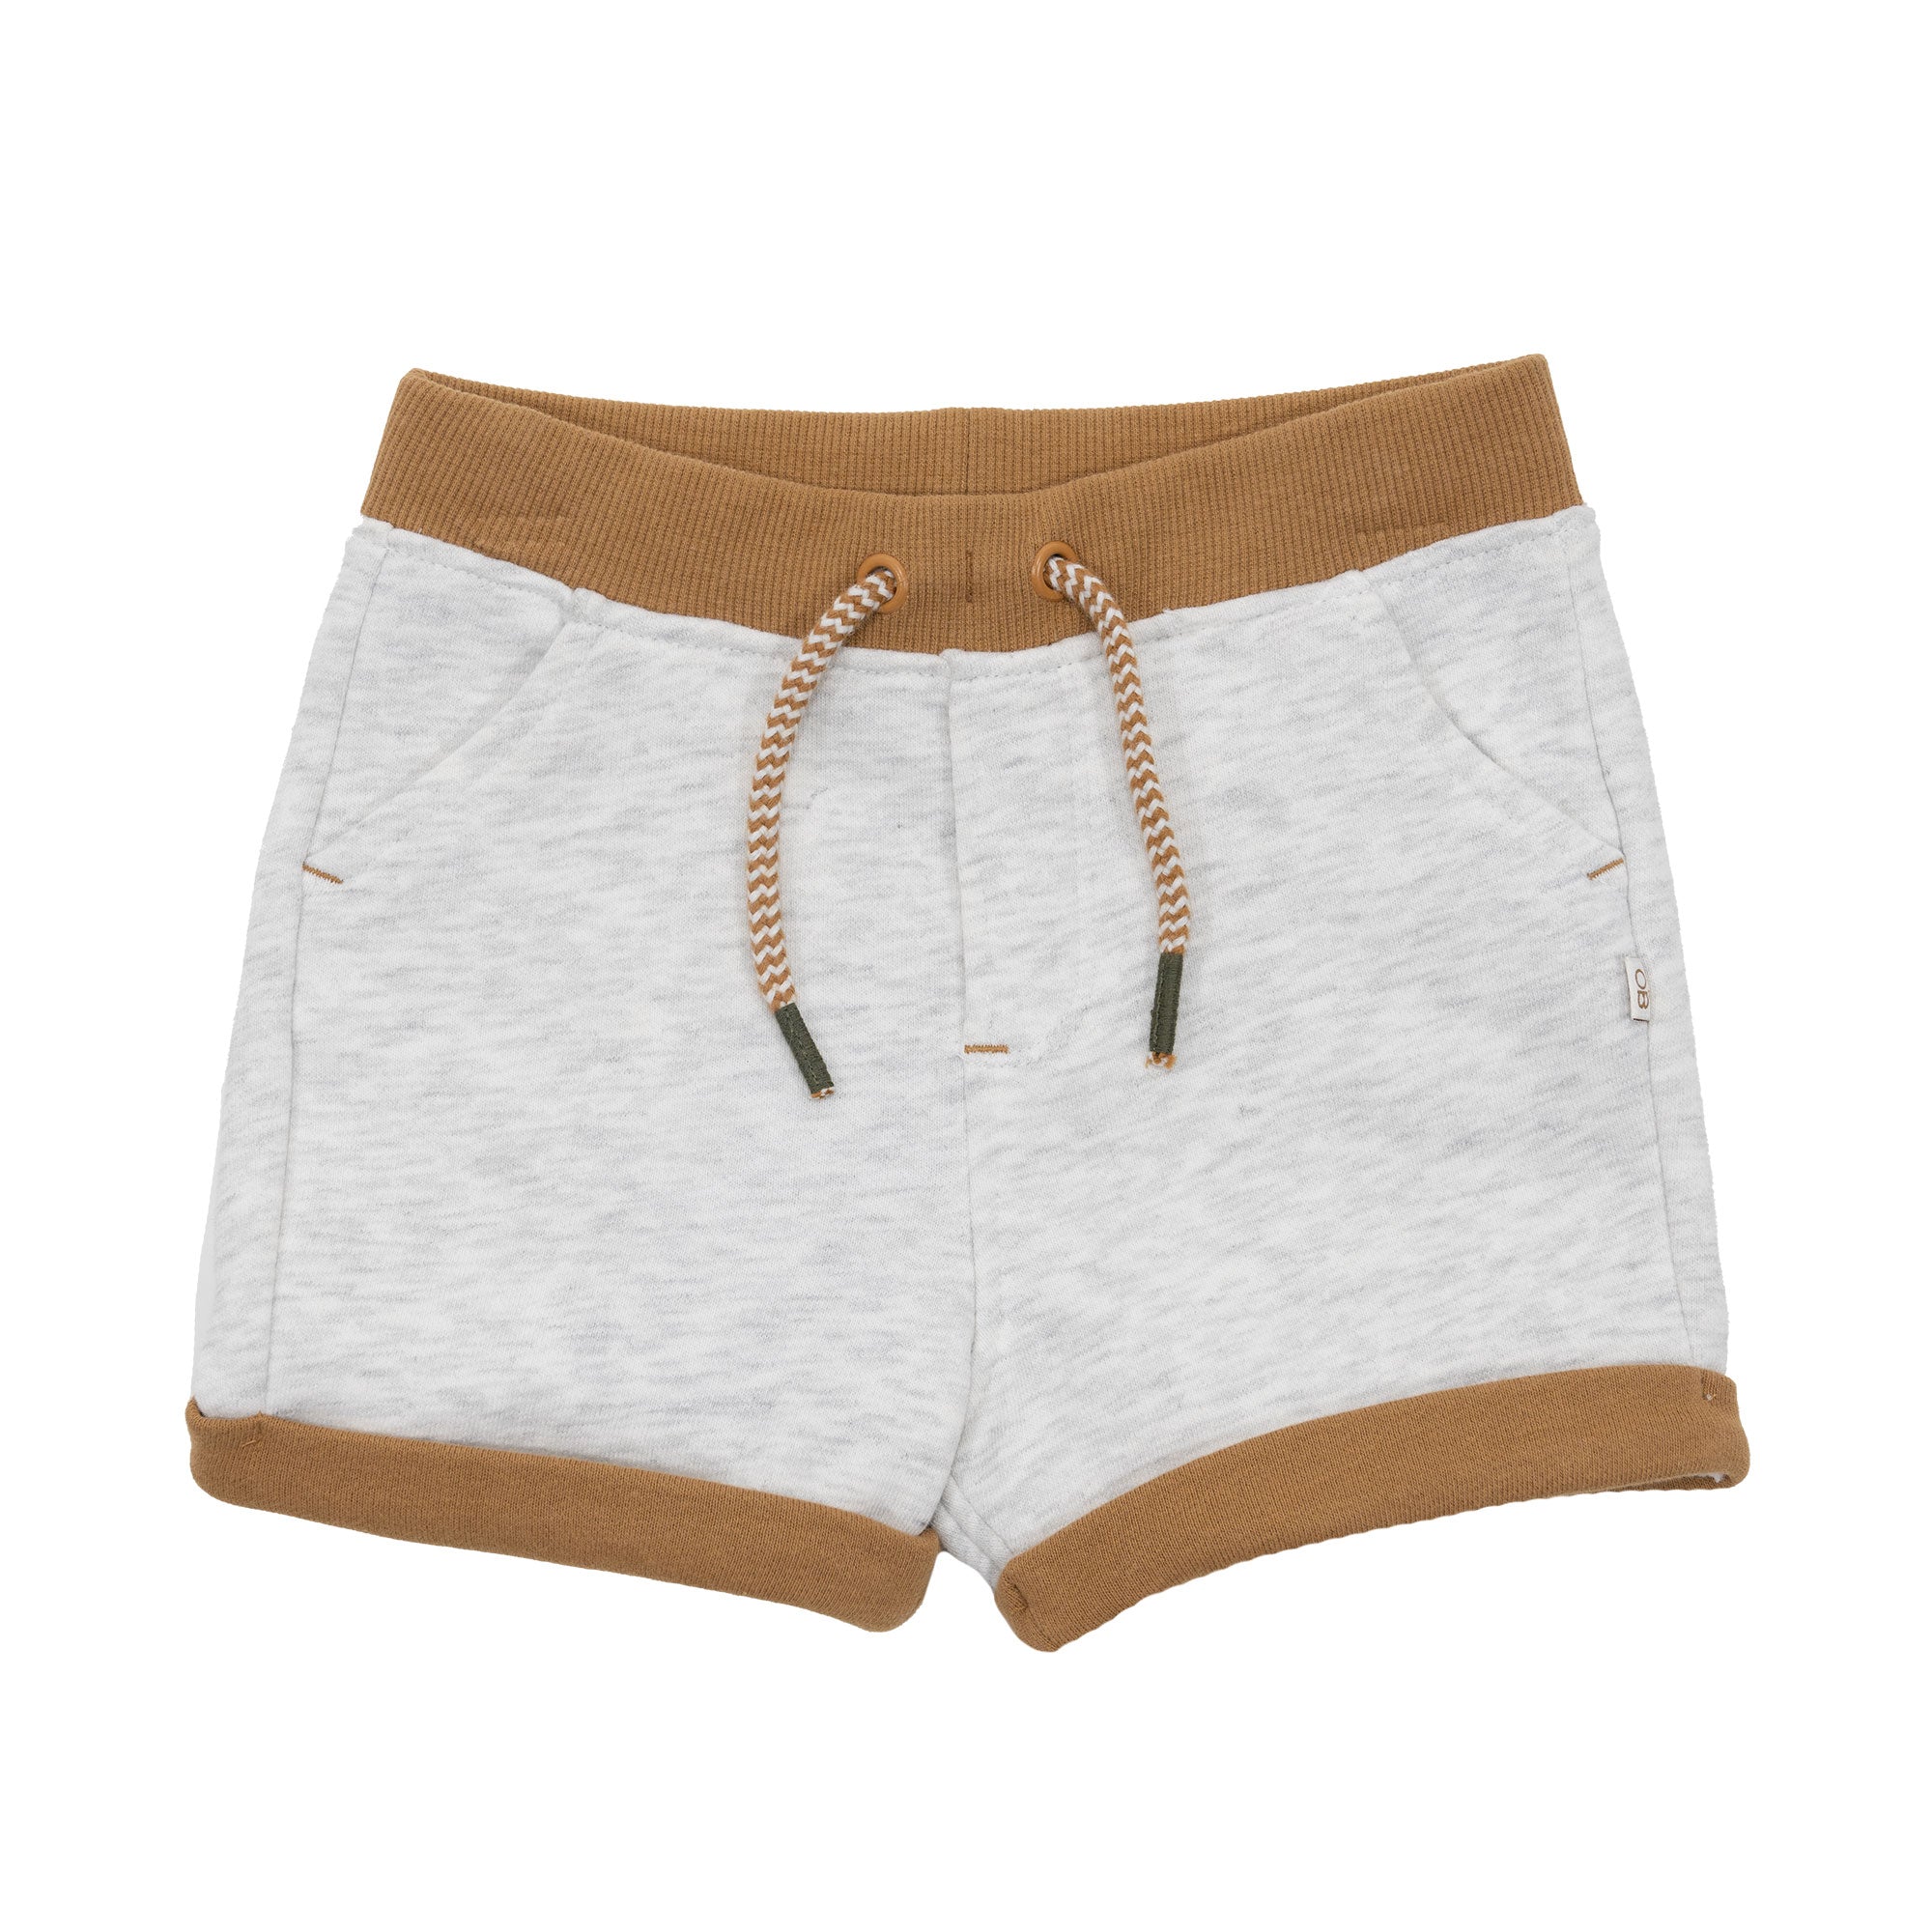 Boys Shorts: Stylish and Playful for Everyday Adventures